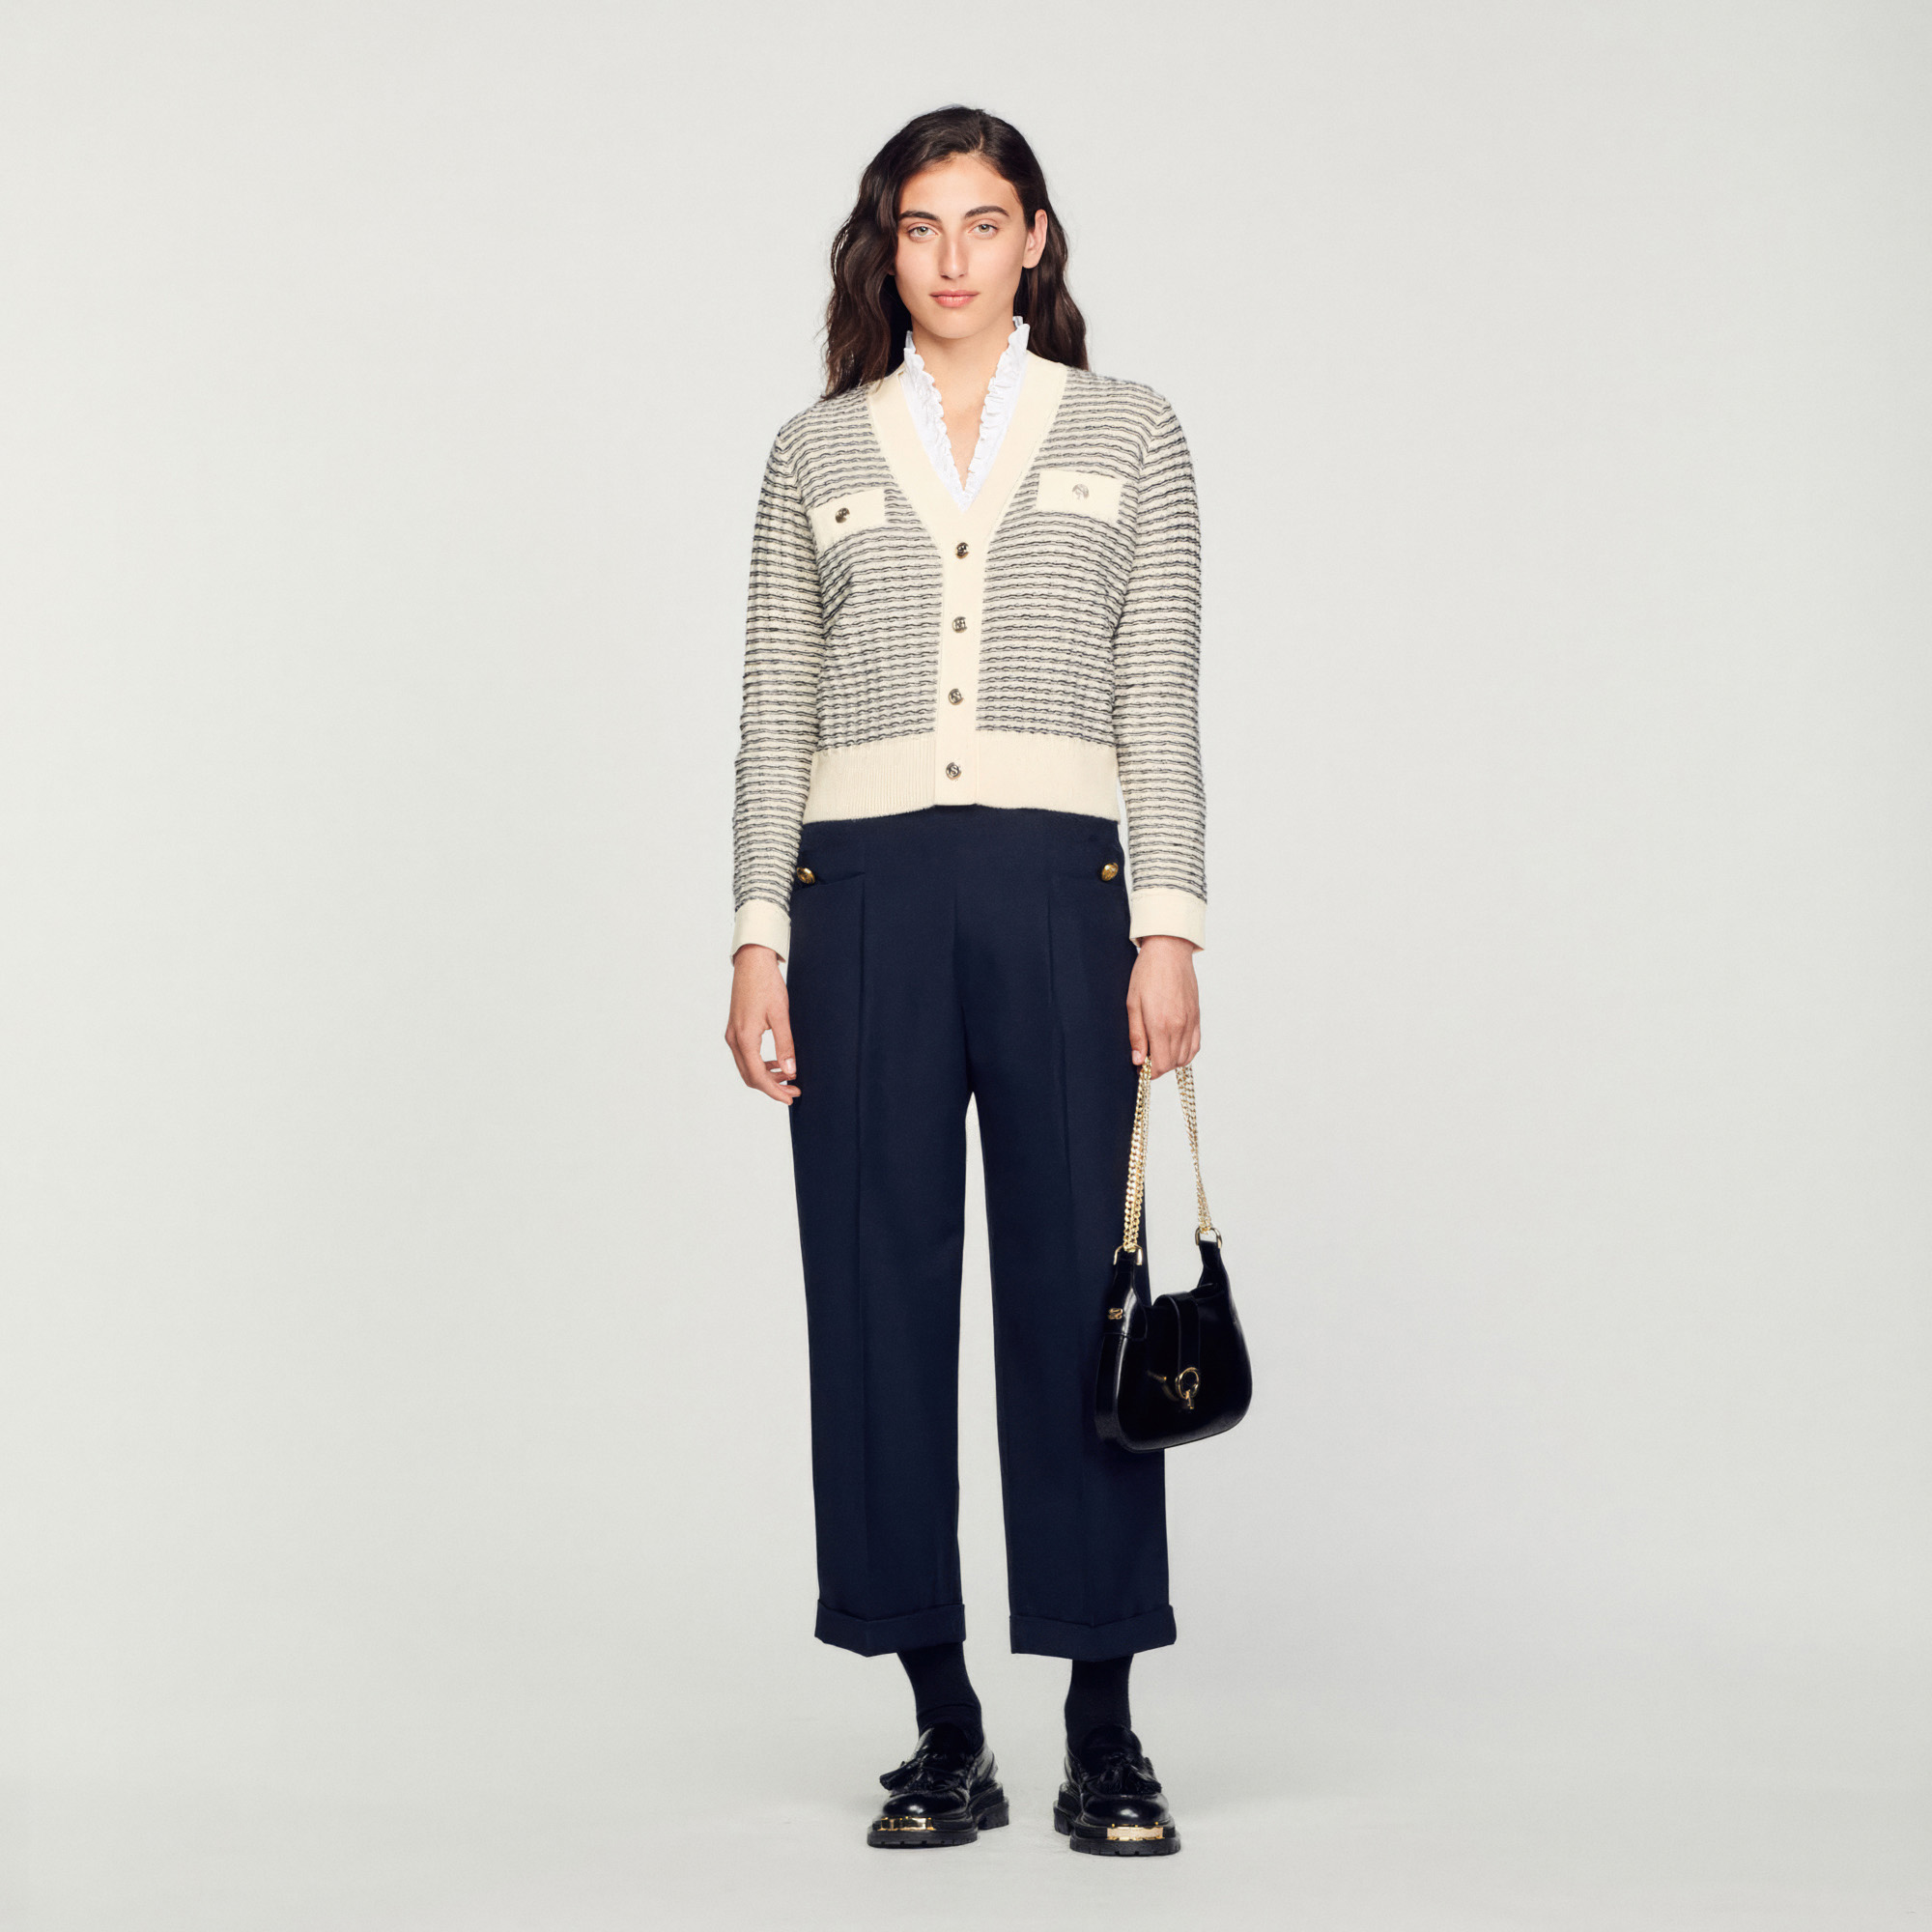 Sandro wool Band: Striped knit cardigan with long sleeves and a button fastening